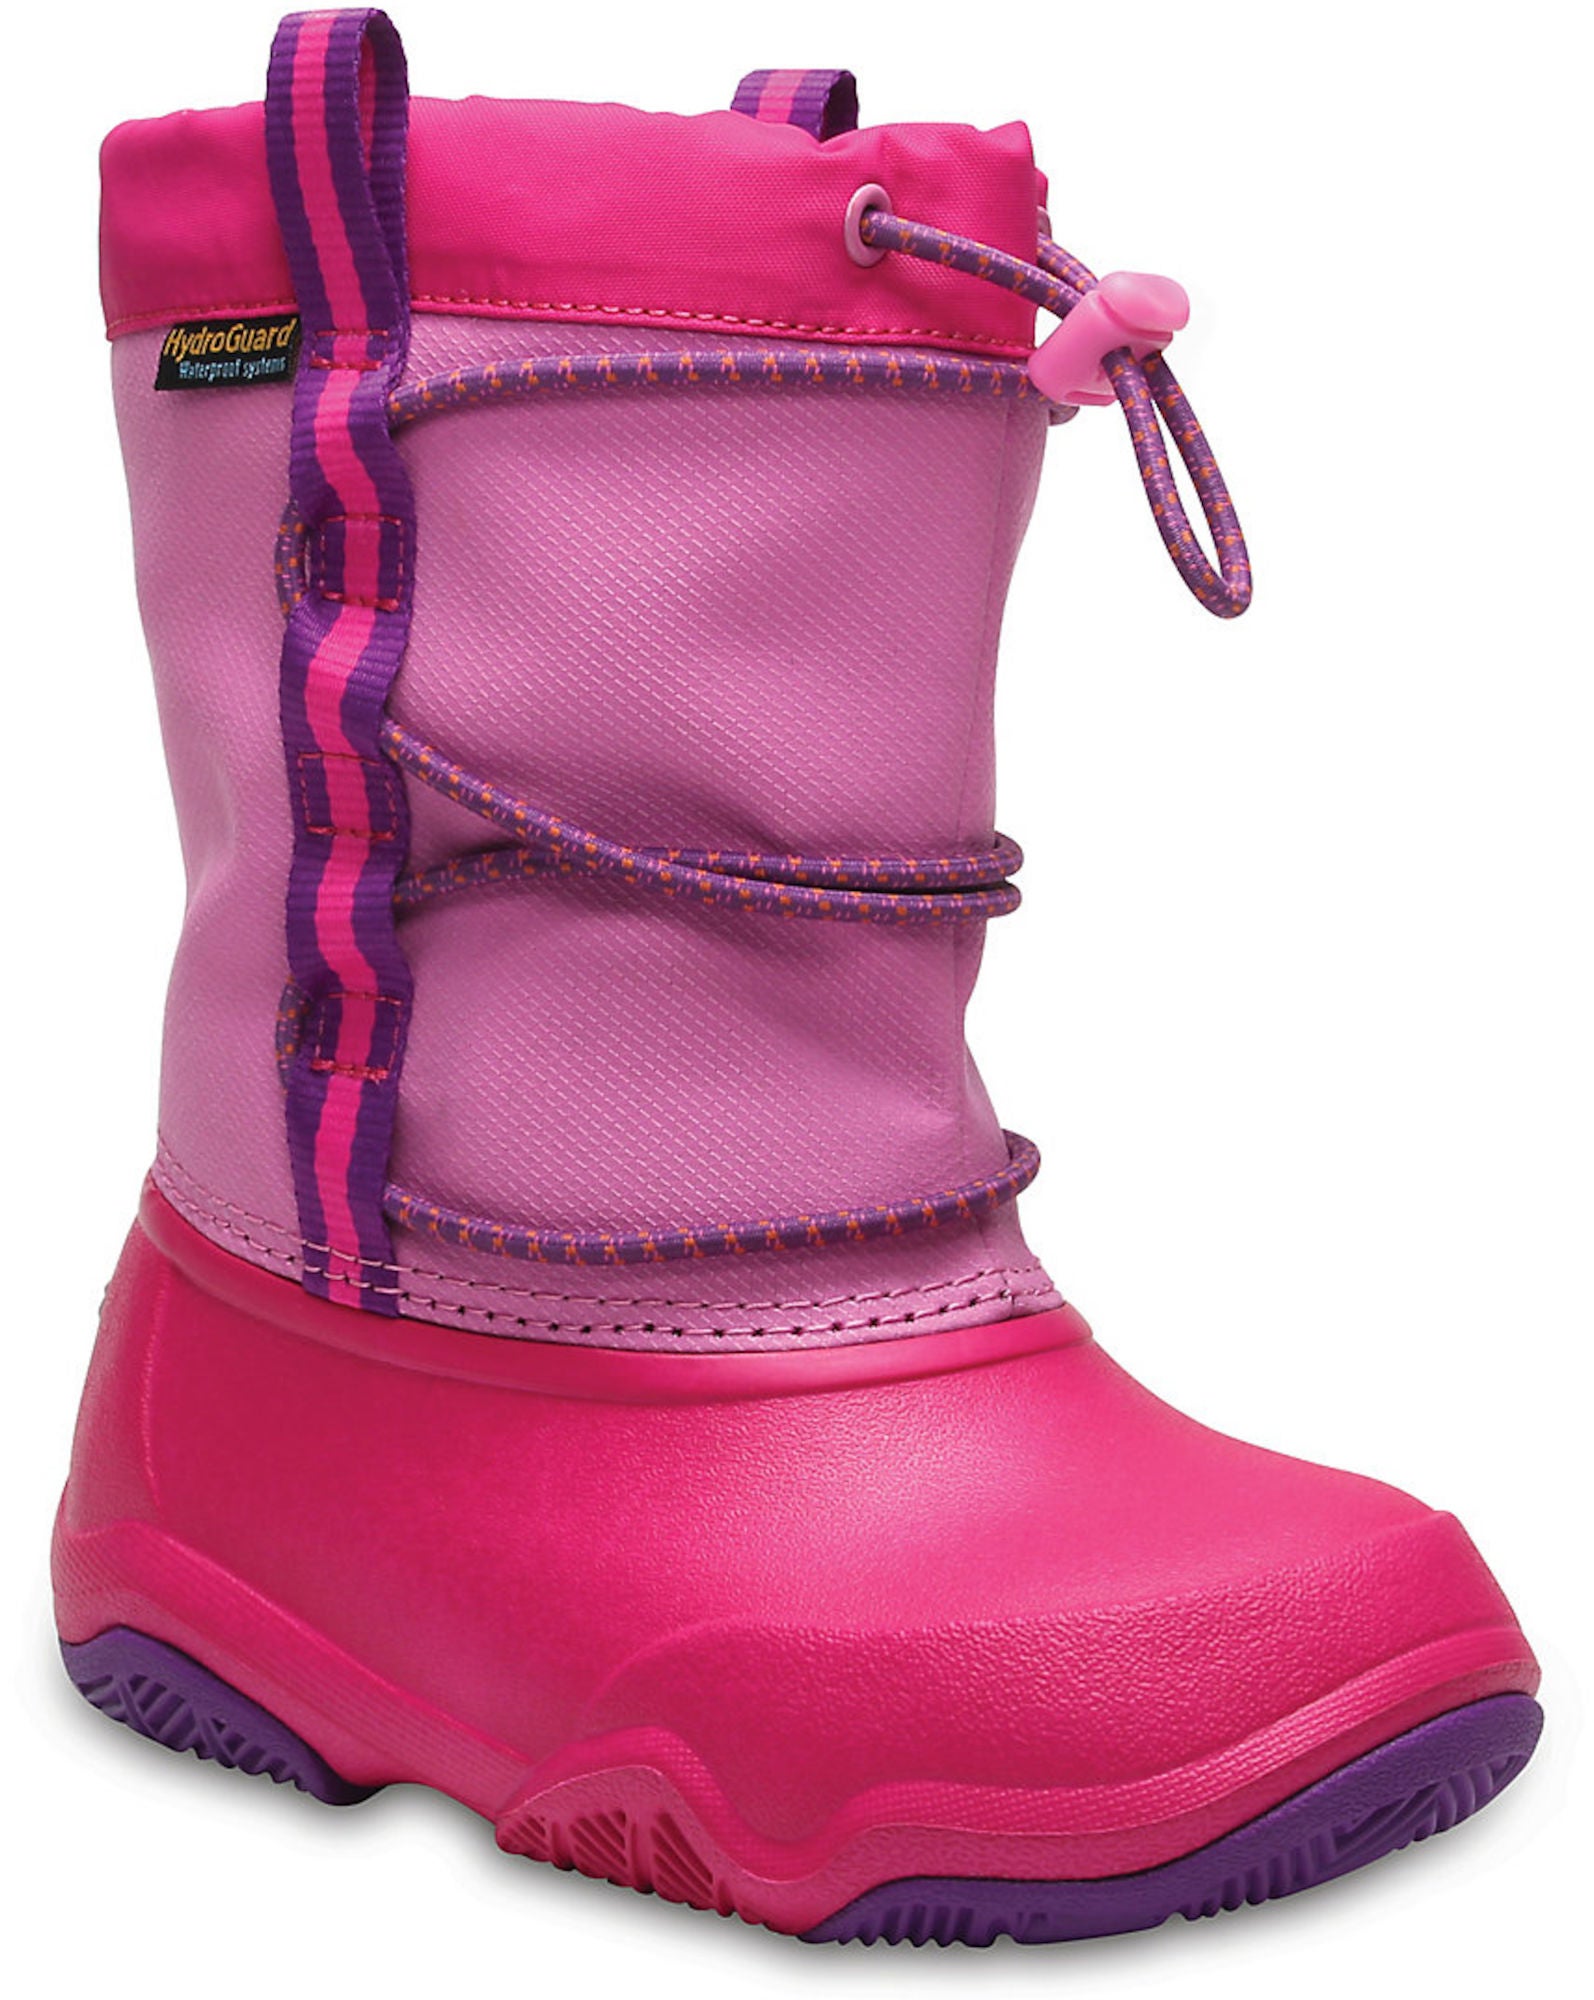 Crocs Swiftwater Stiefel, Rosa 32-33